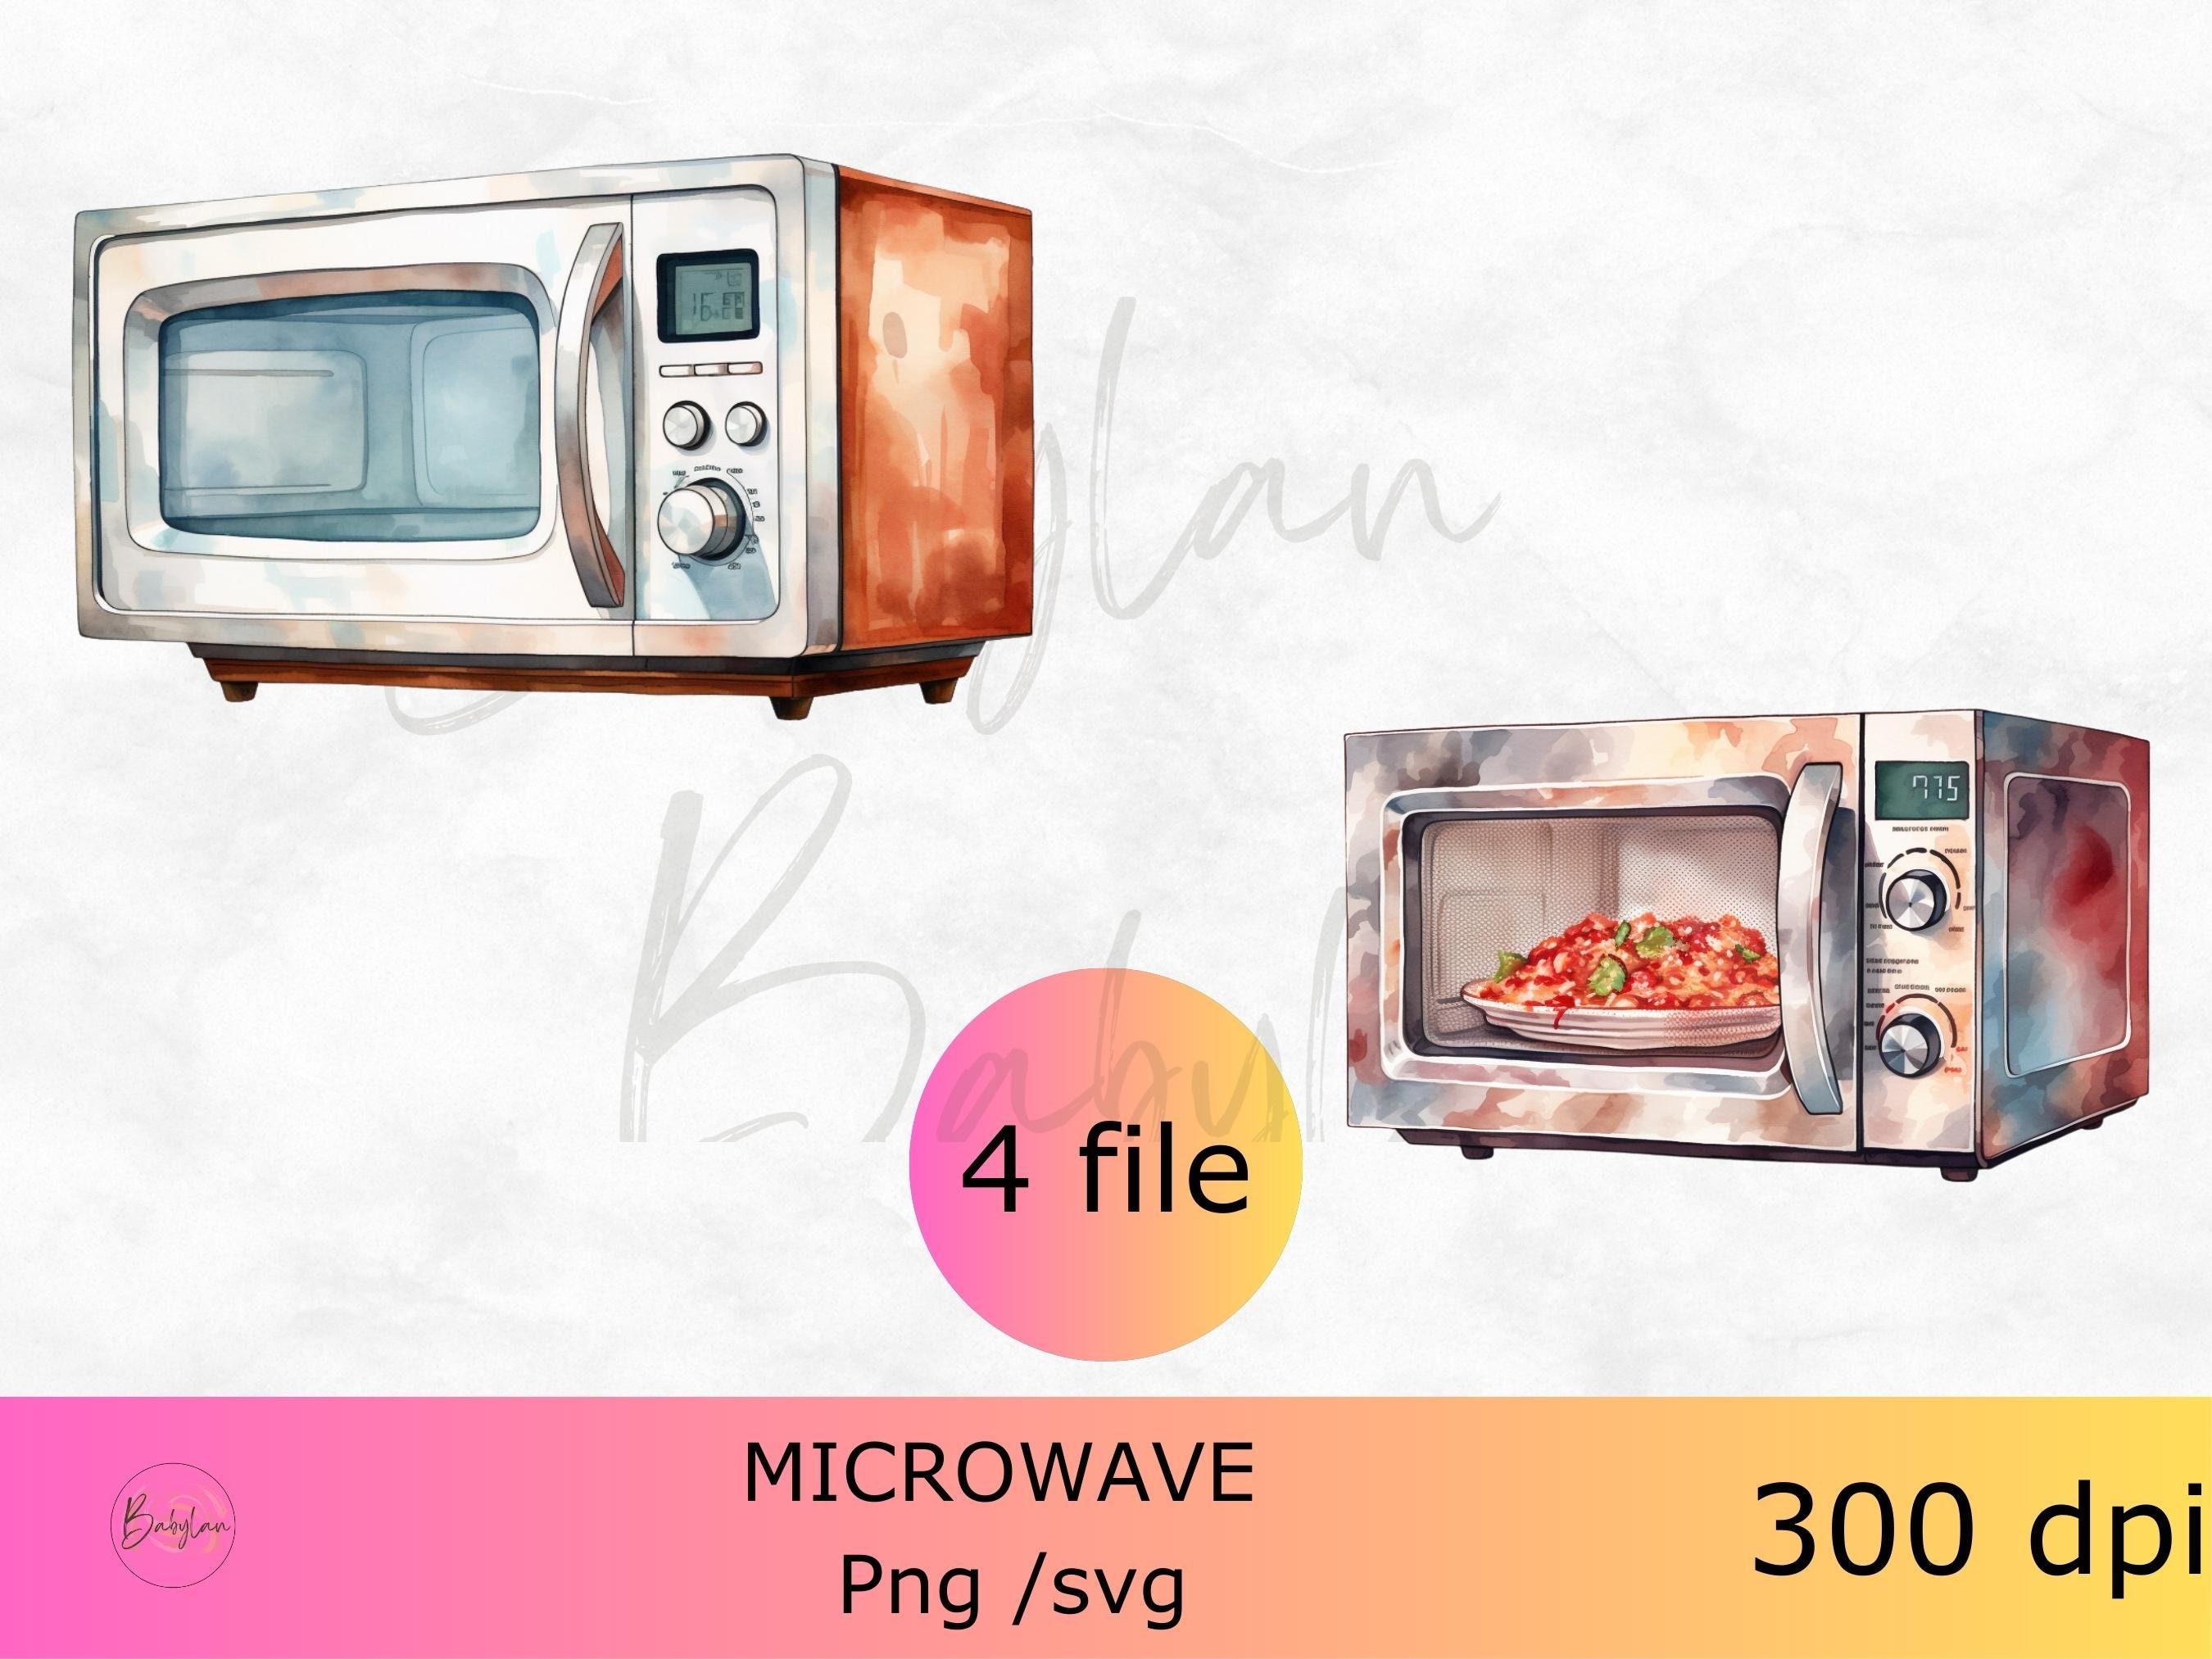 SVG Dollhouse Small Kitchen Microwave / Dollhouse DIY Mini Microwave Oven  Cricut Cut File Instant Download -  Israel